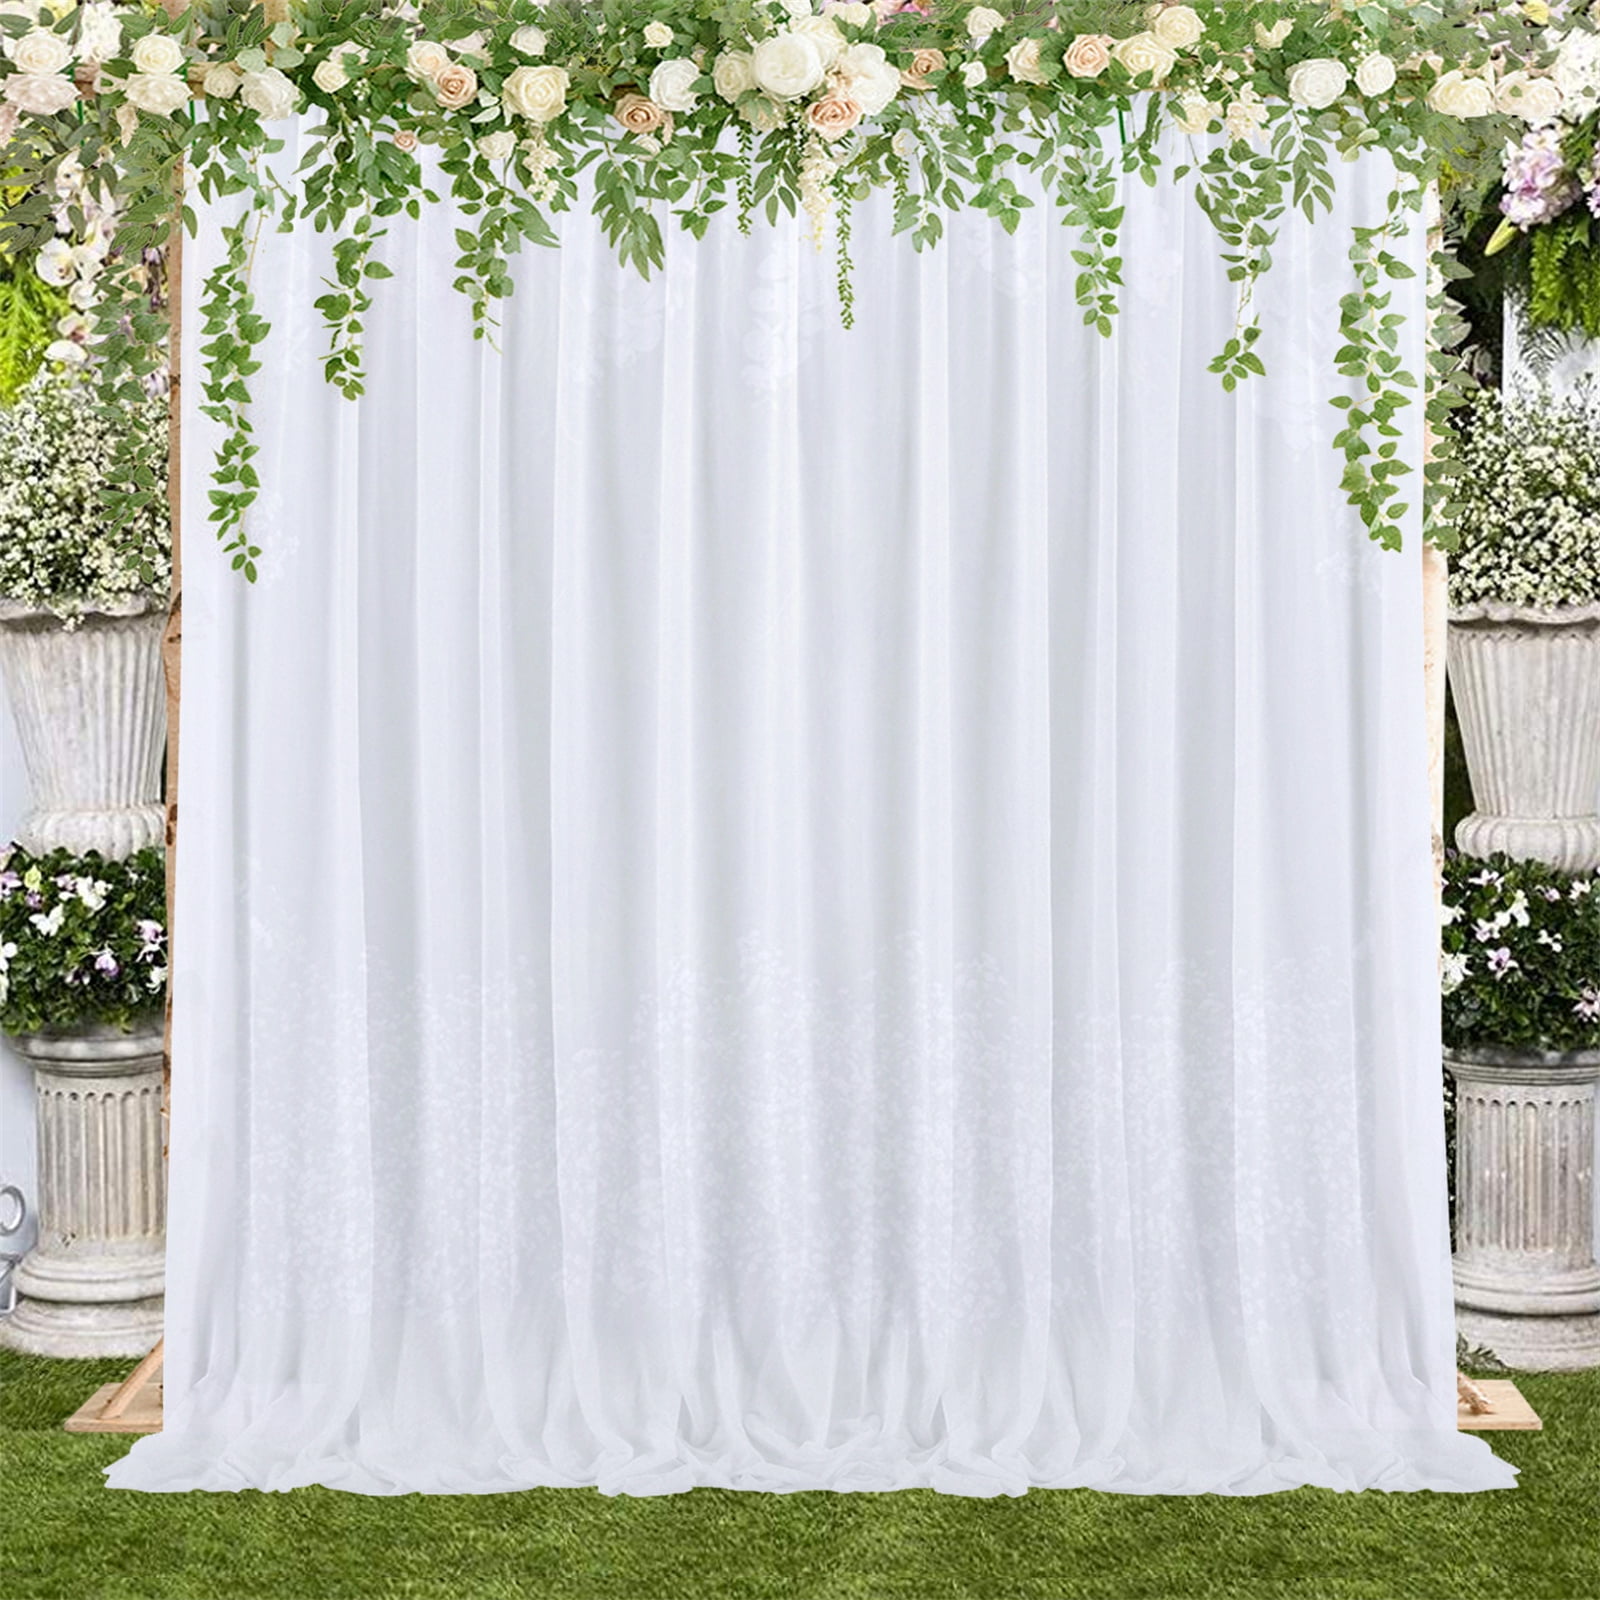 Wedding Background Decoration Fabric Screen For Whith Indoor Arch